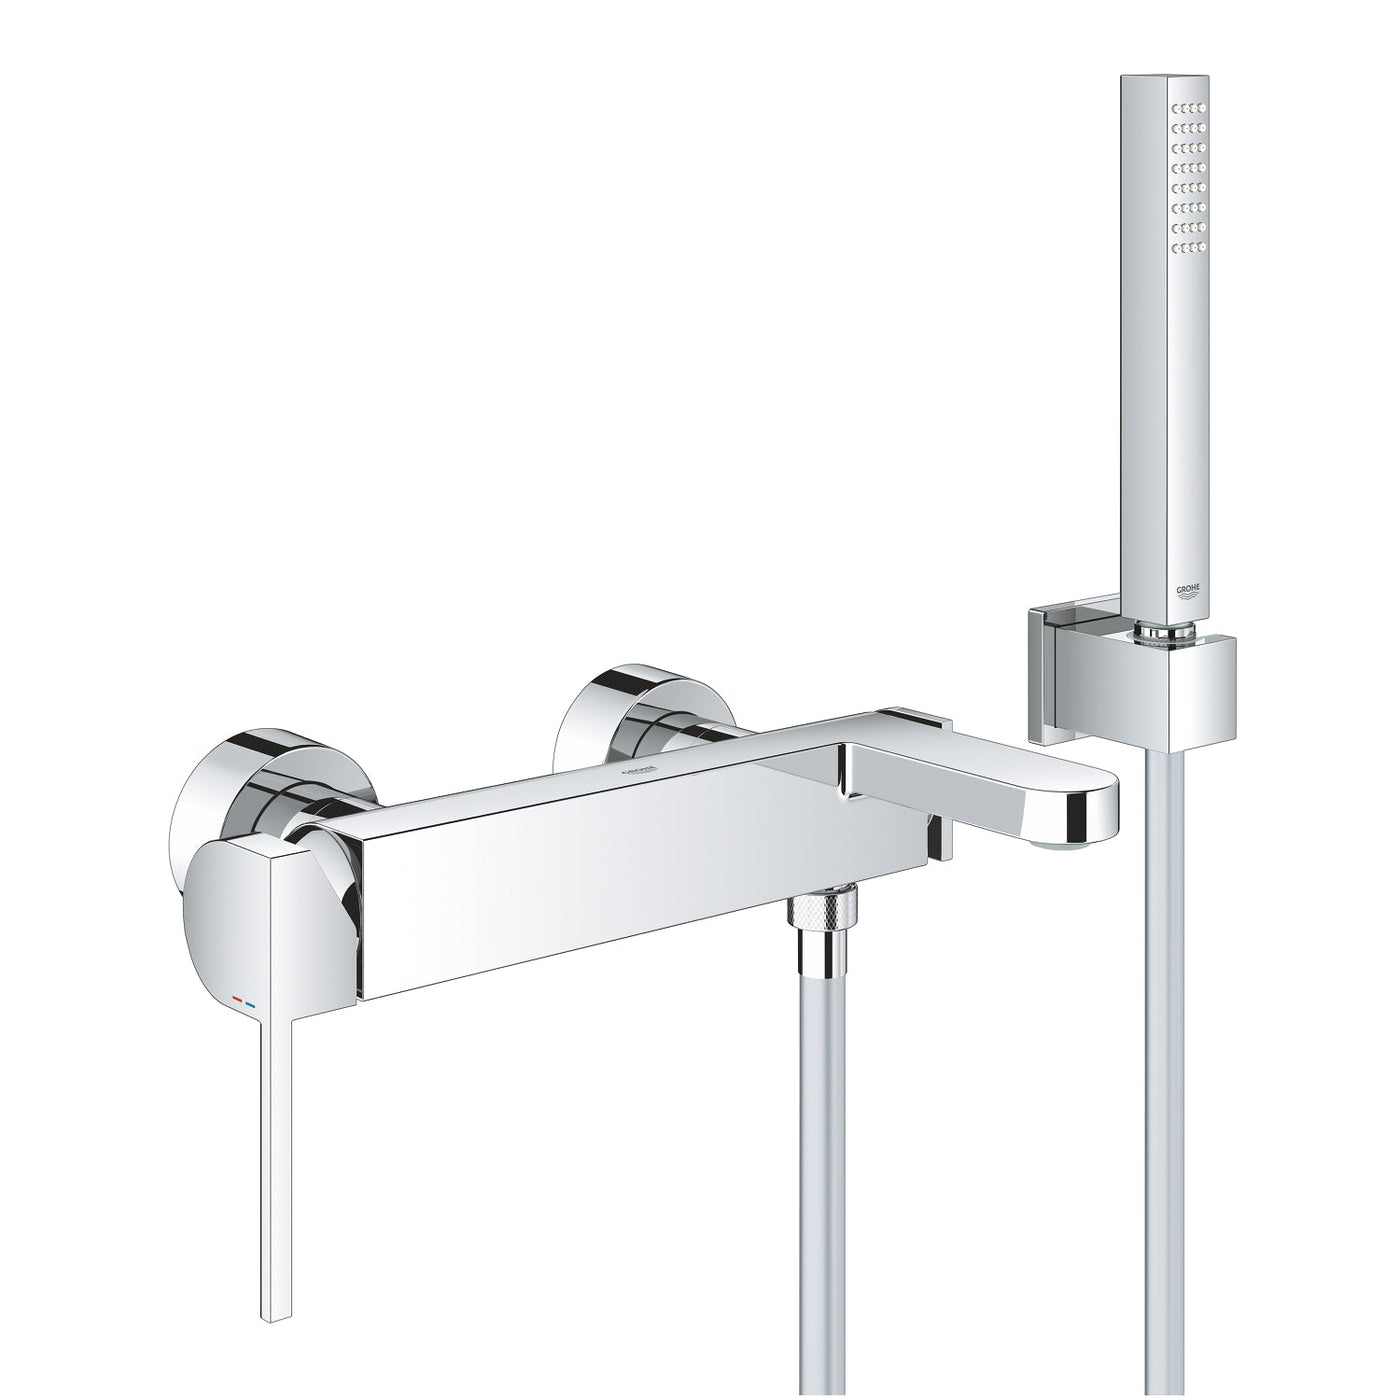 Wall Mounted Chrome GROHE Plus Single-lever bath/shower mixer 1/2" - Letta London - 